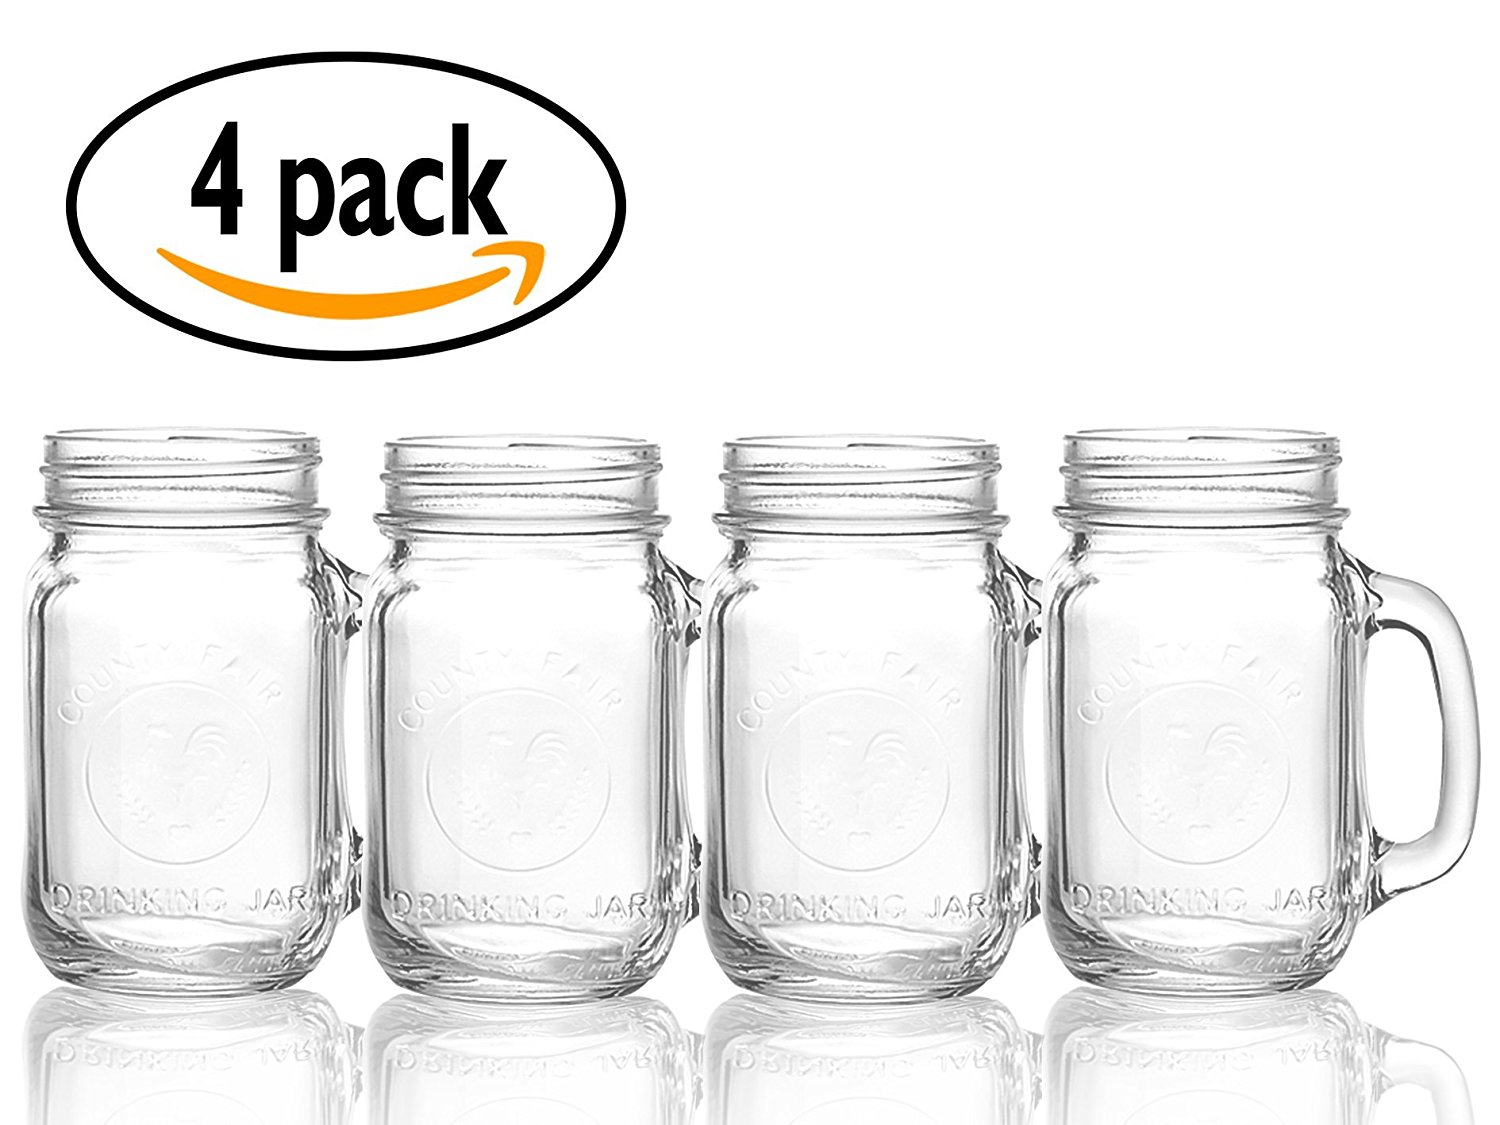 Favors Great For Gifts Mason Jar 4 Ounce Mugs Candles And Crafts Set of 12 Glasses With Handles And Leak-Proof Lids Drinks